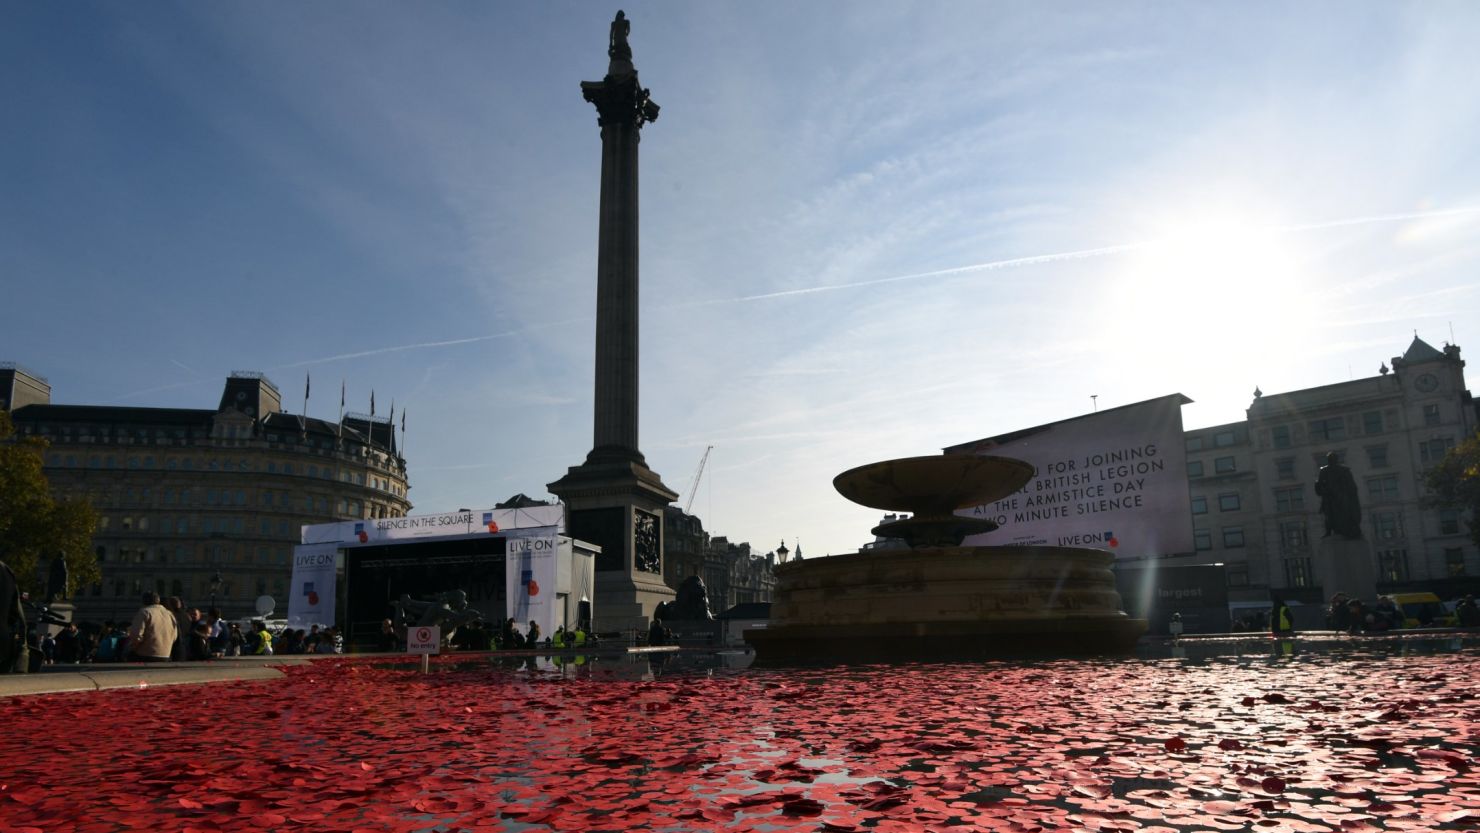 Poppies float in a fountain during the Armistice Day event in Trafalgar Square, London.